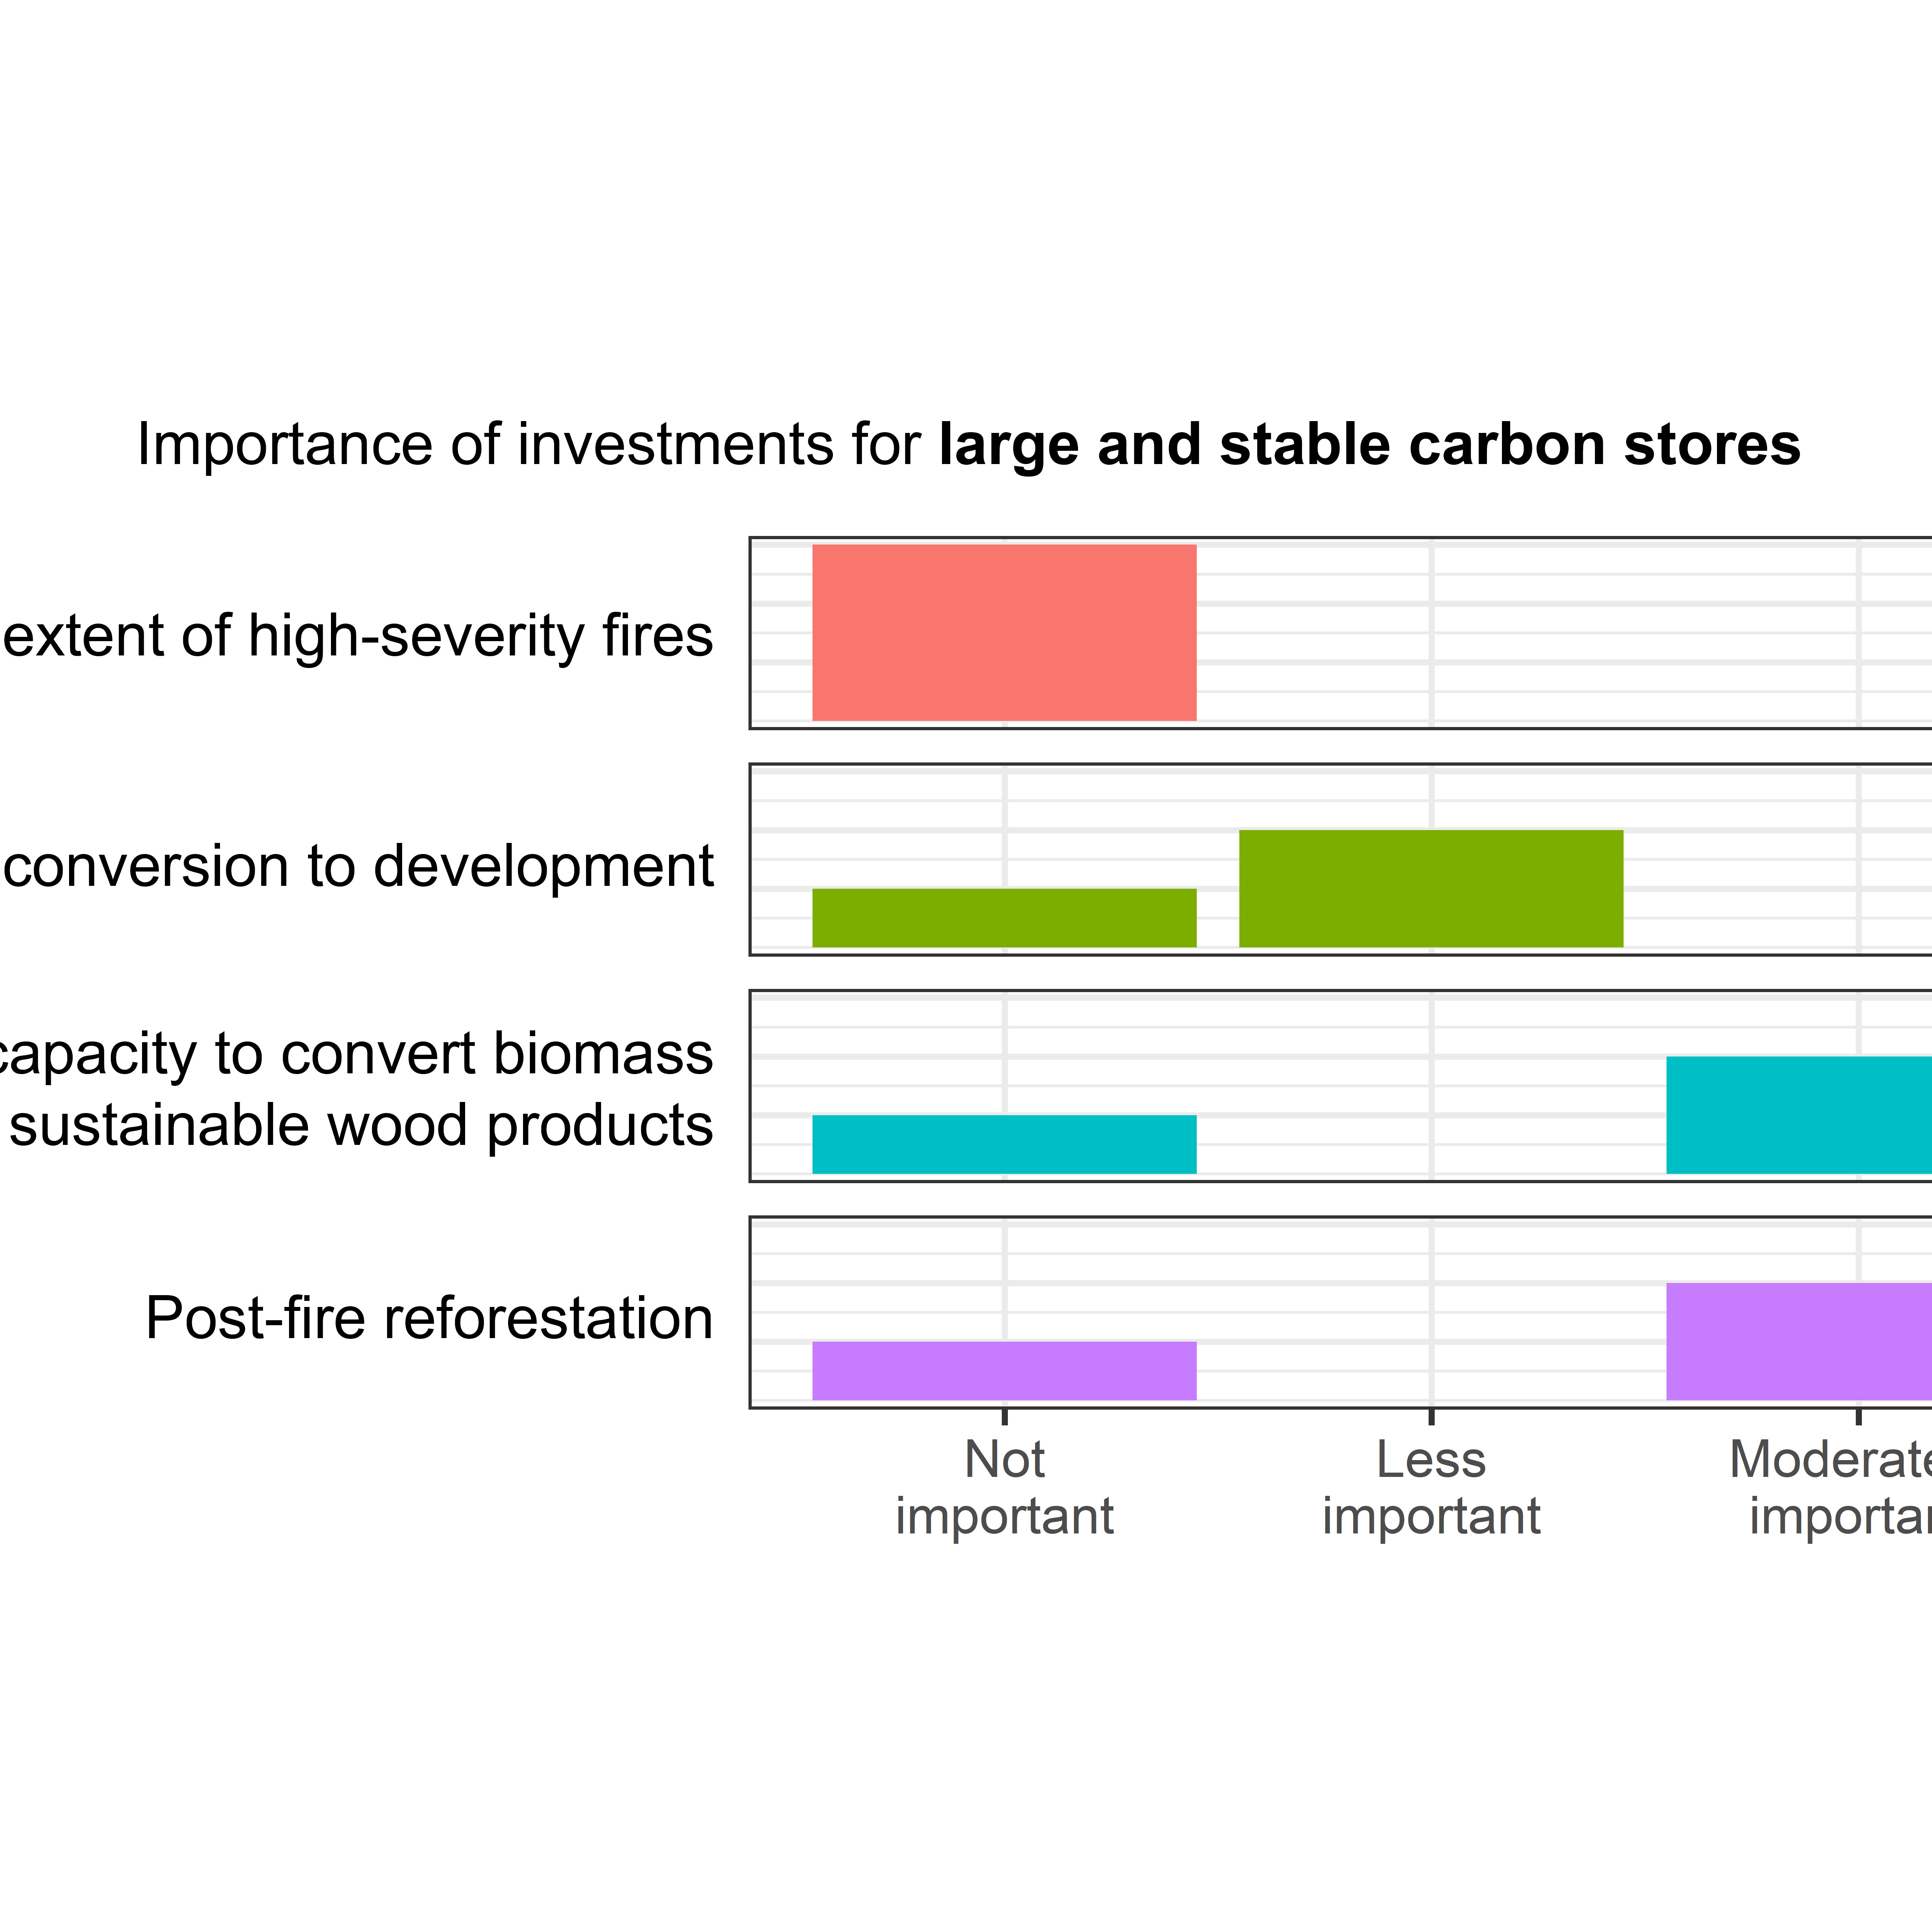 Importance of Investments for Large and Stable Carbon Stores Histogram